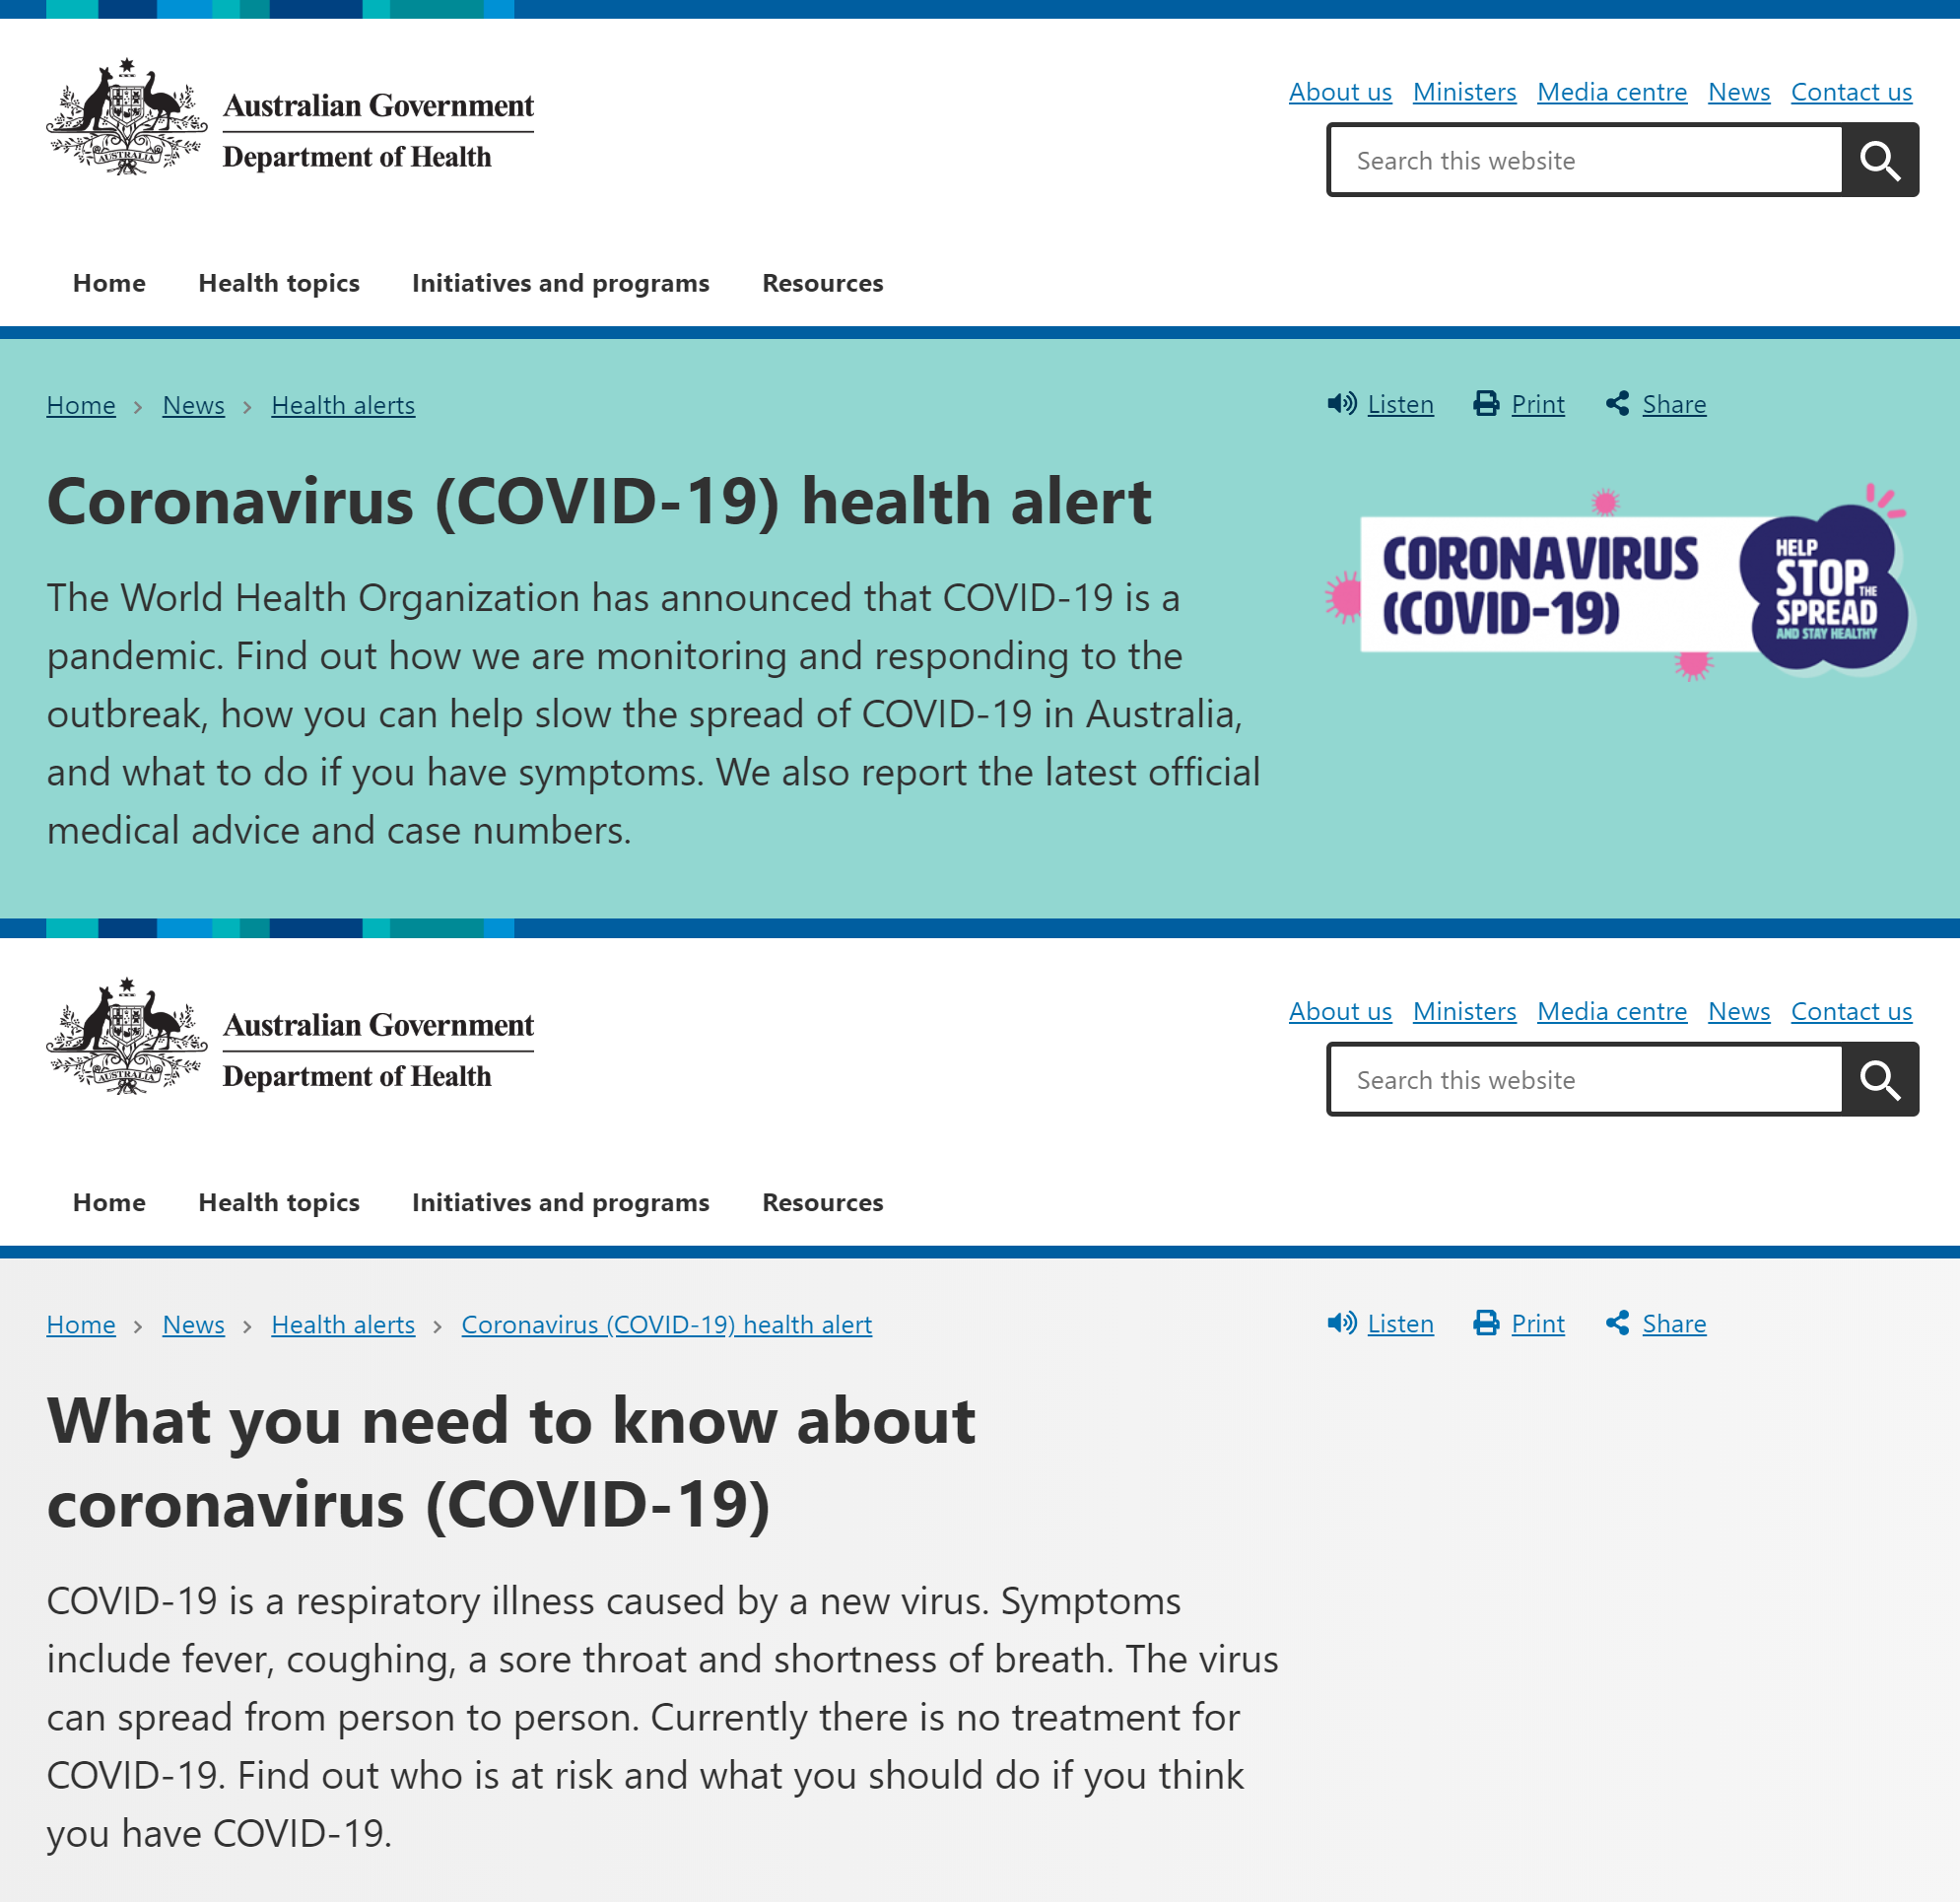 The Australian Department of Health provides a concise summary of the content on each page of their coronavirus alert section.